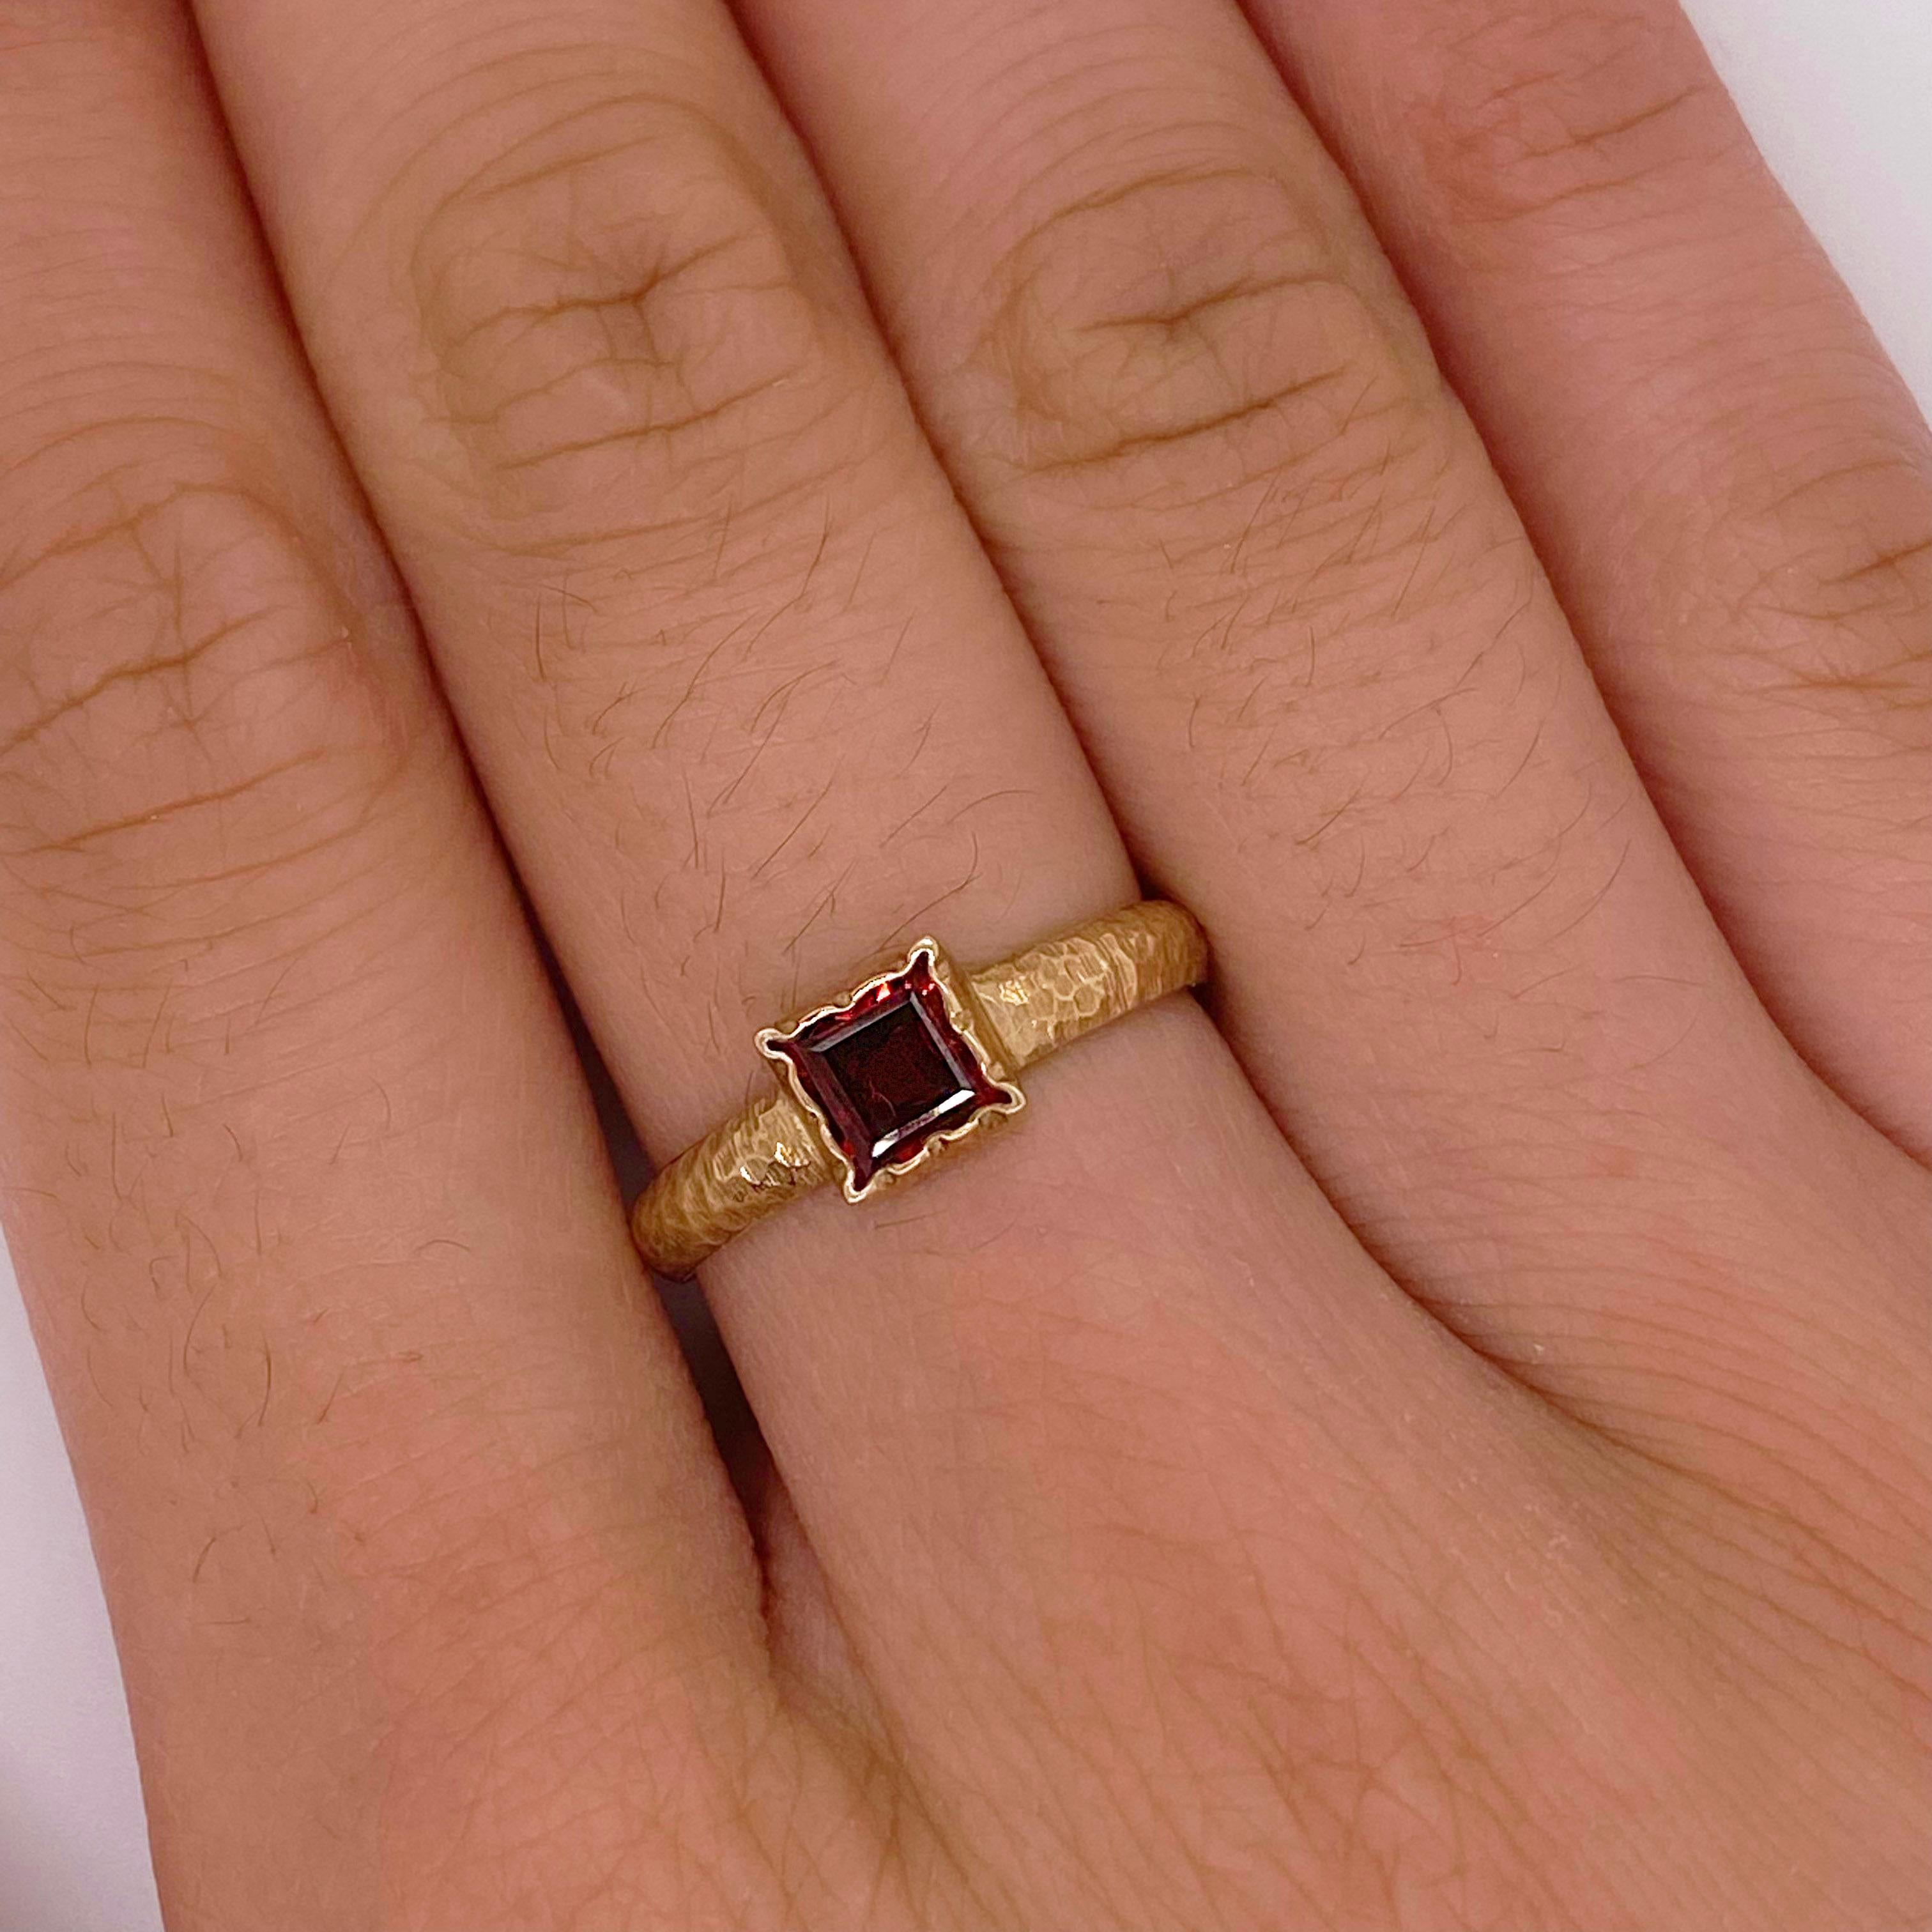 For Sale:  English Garnet Ring, Hammered Band with Satin Finish, 9K Yellow Gold, Square Cut 4